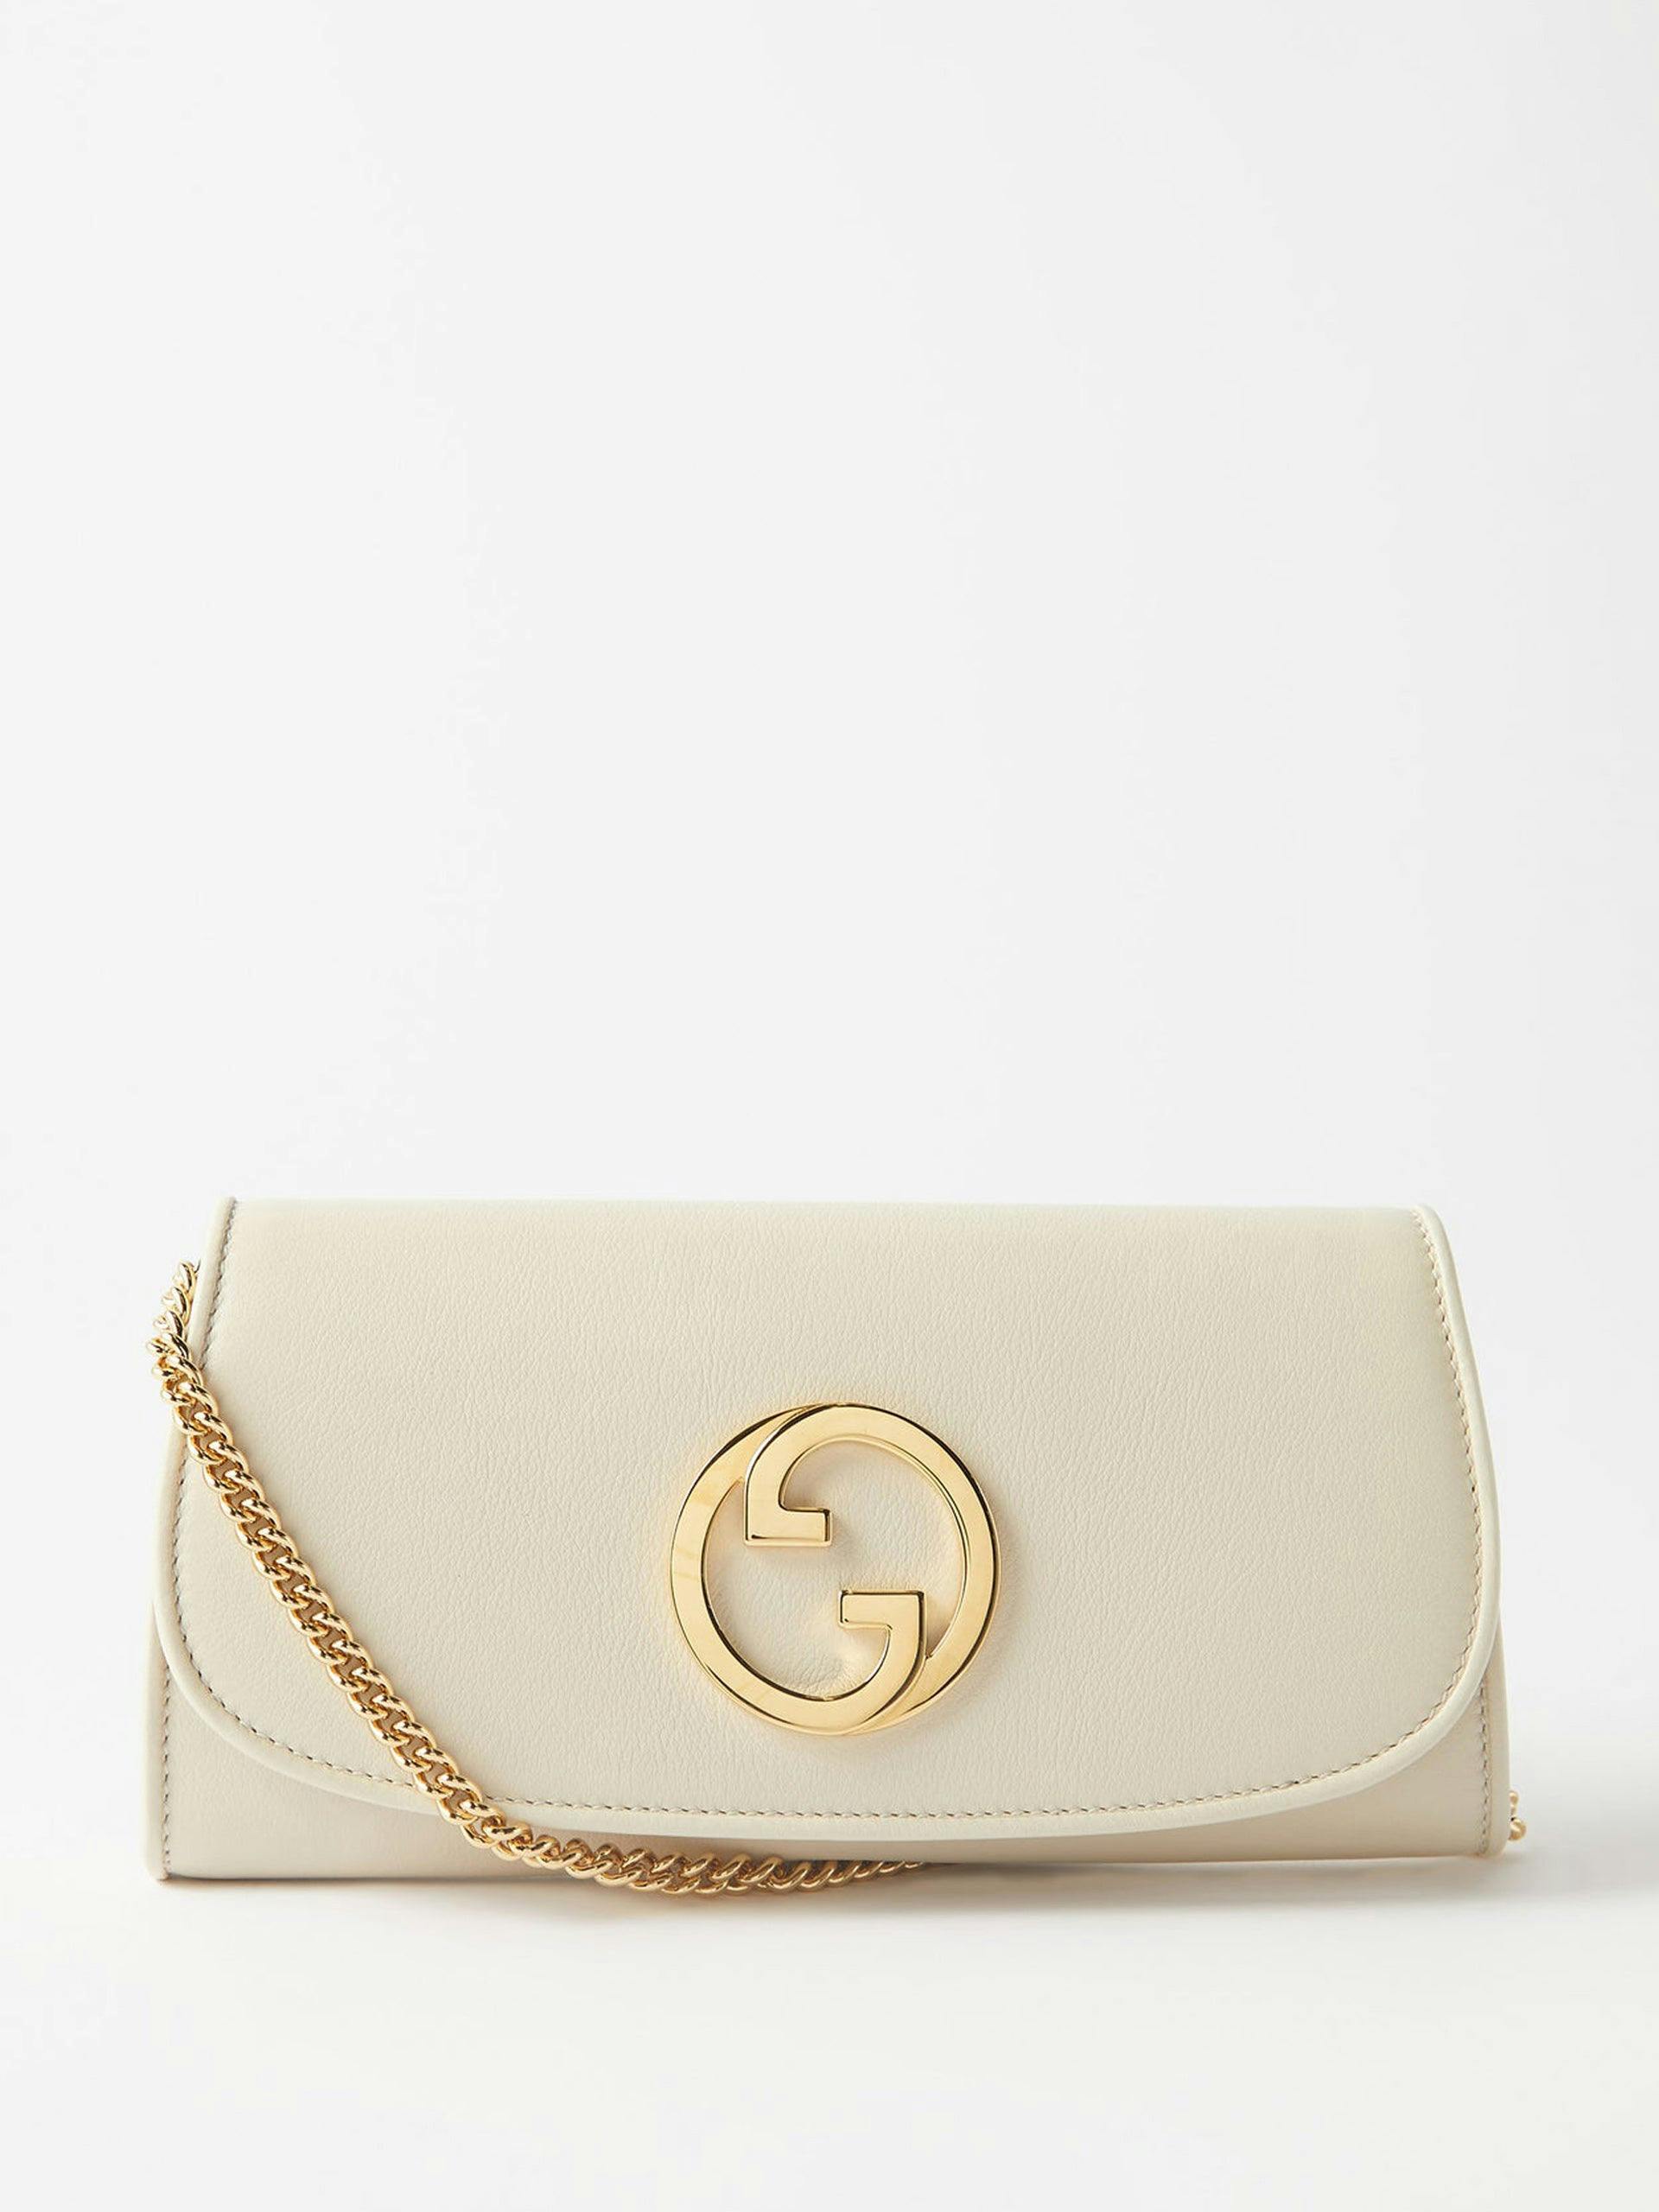 Chain-strap leather cross-body bag